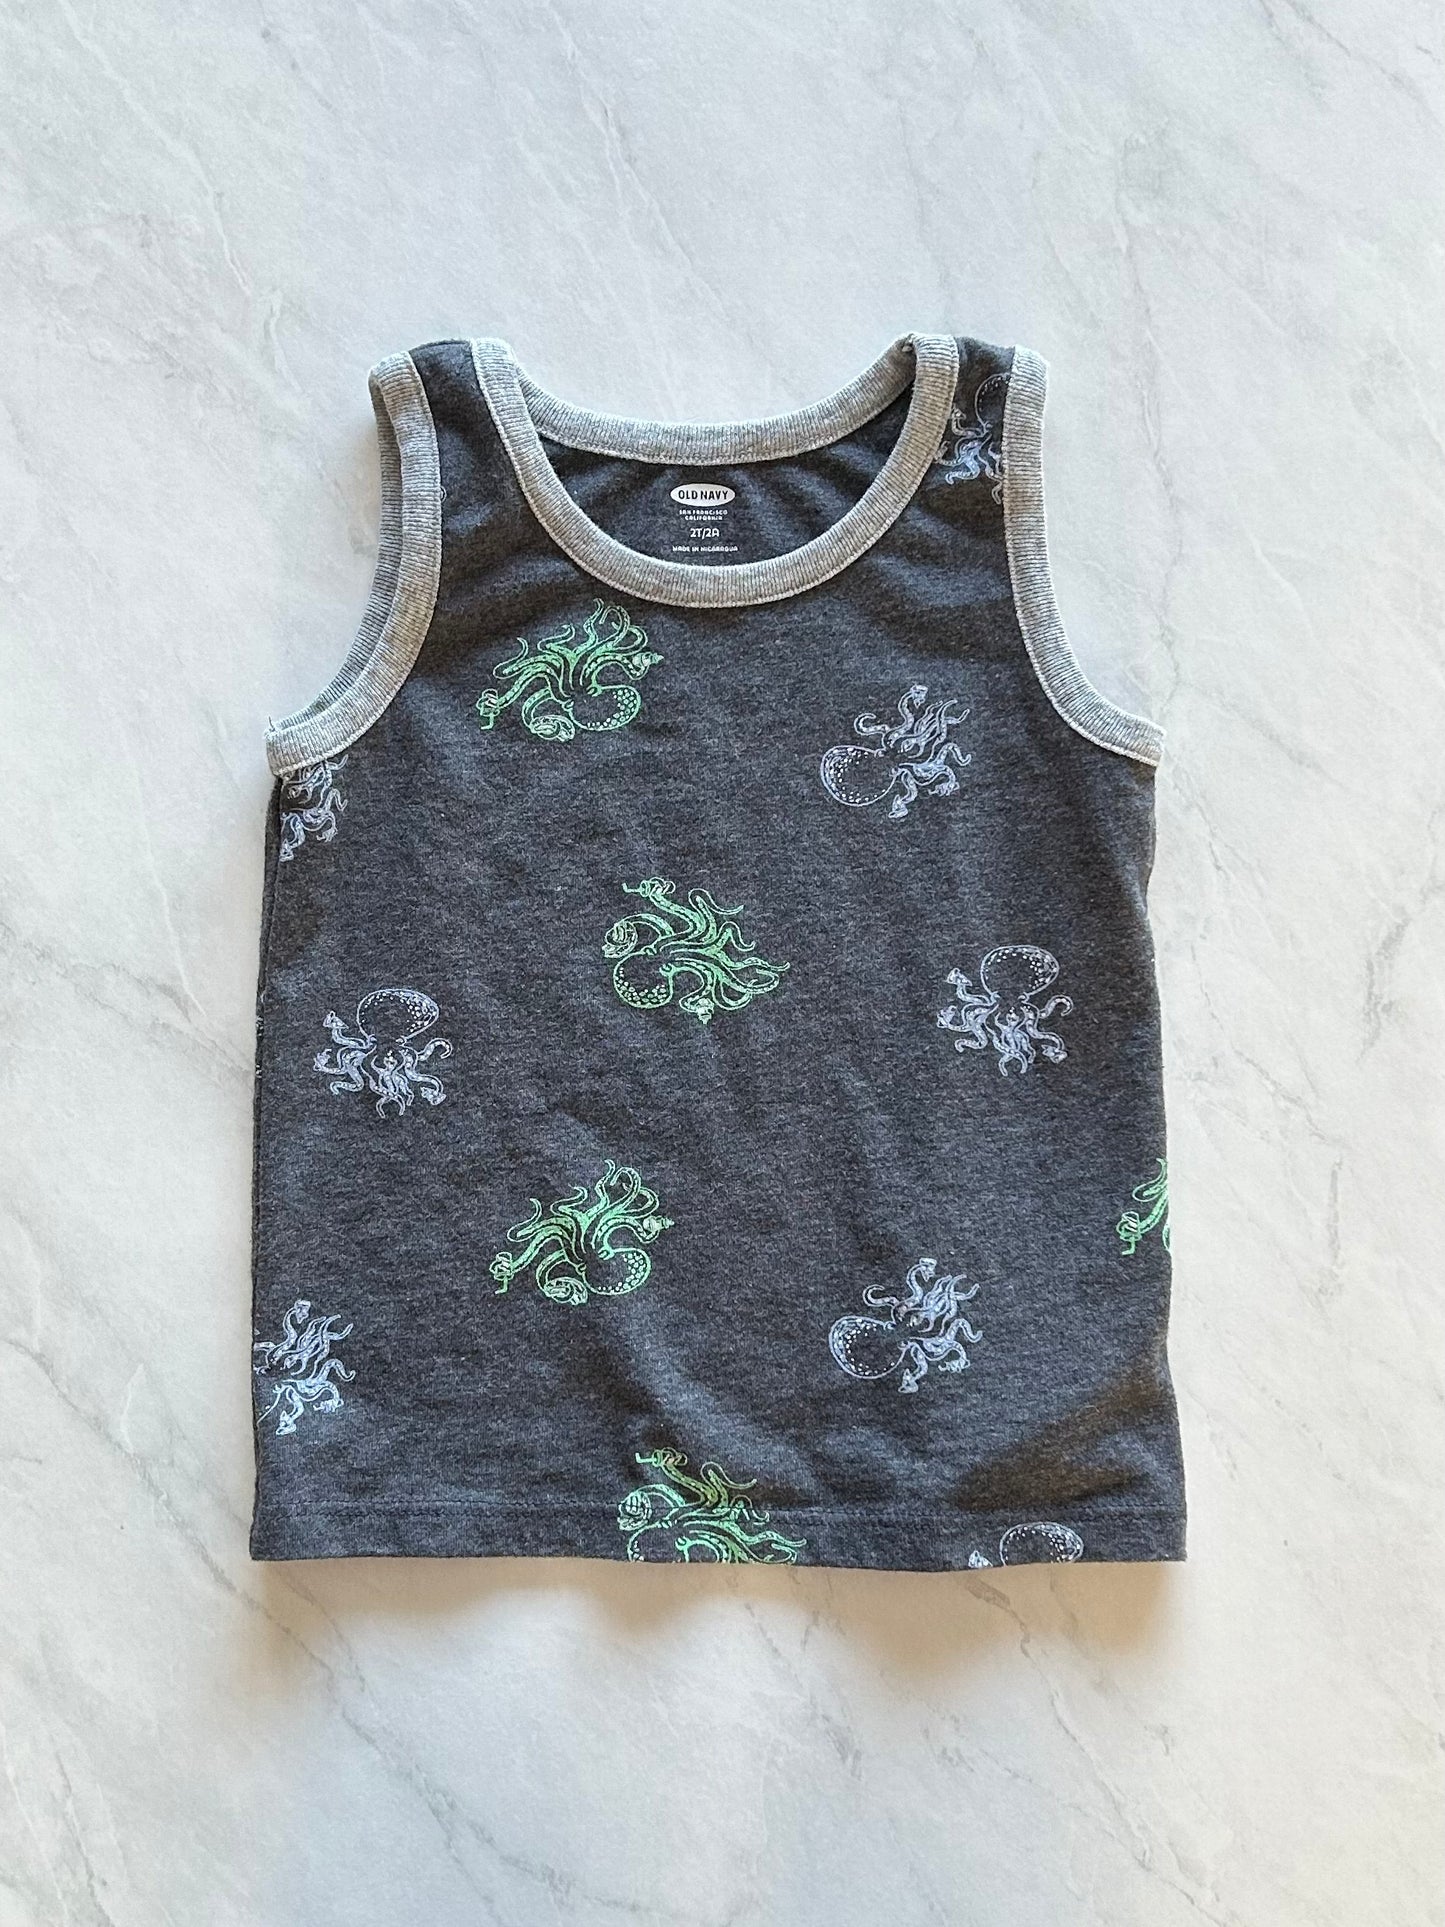 Camisole - Old navy - 2T